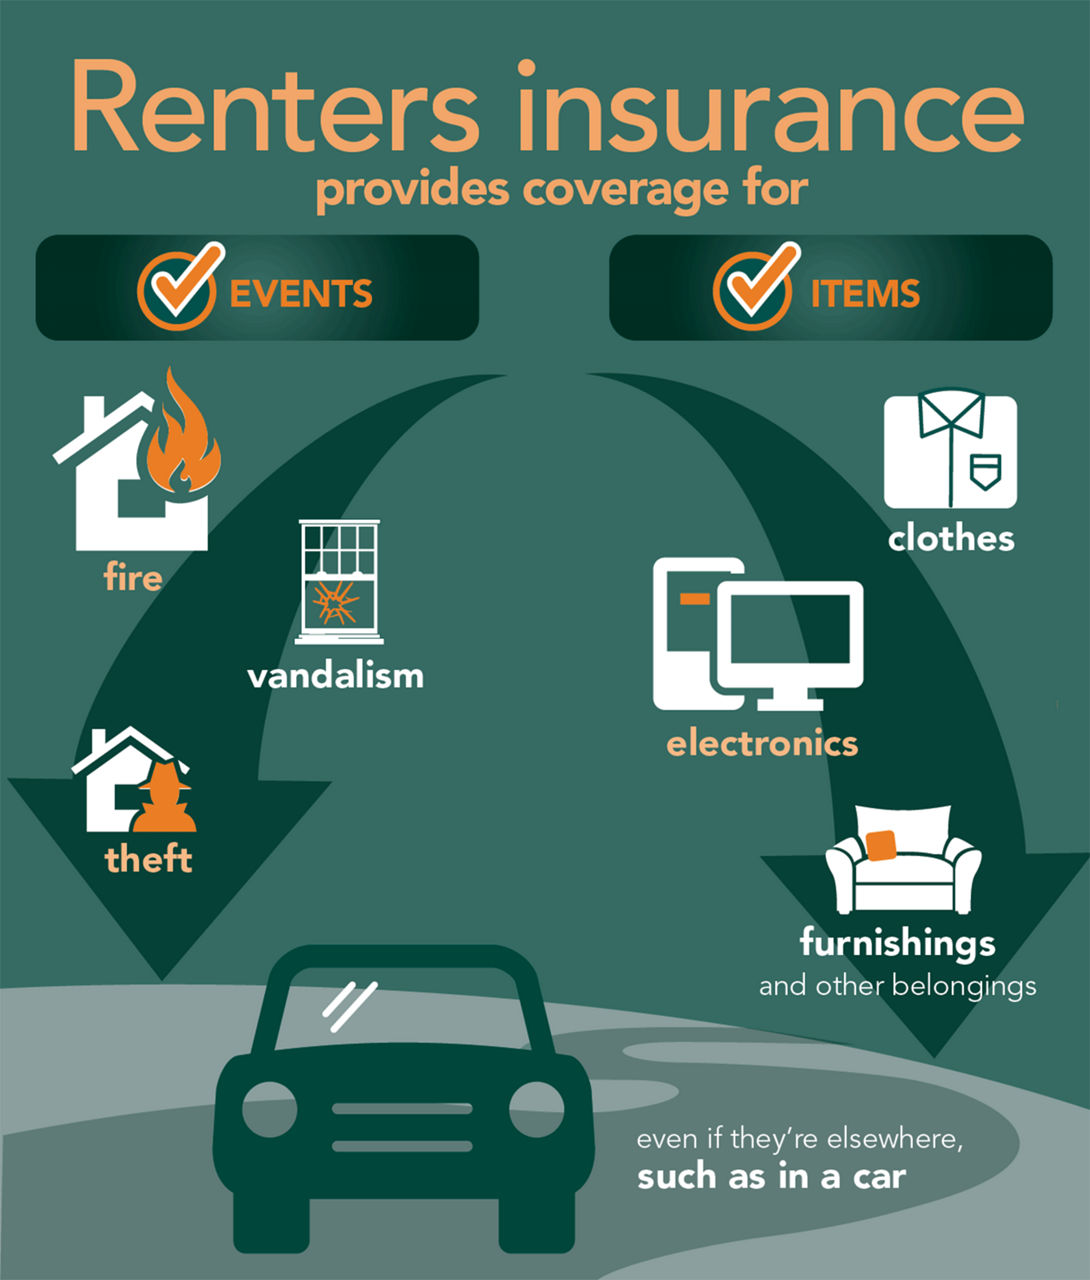 Renters insurance provides coverage for fire vandalism and theft: Also covers belongings even if they’re elsewhere like a car